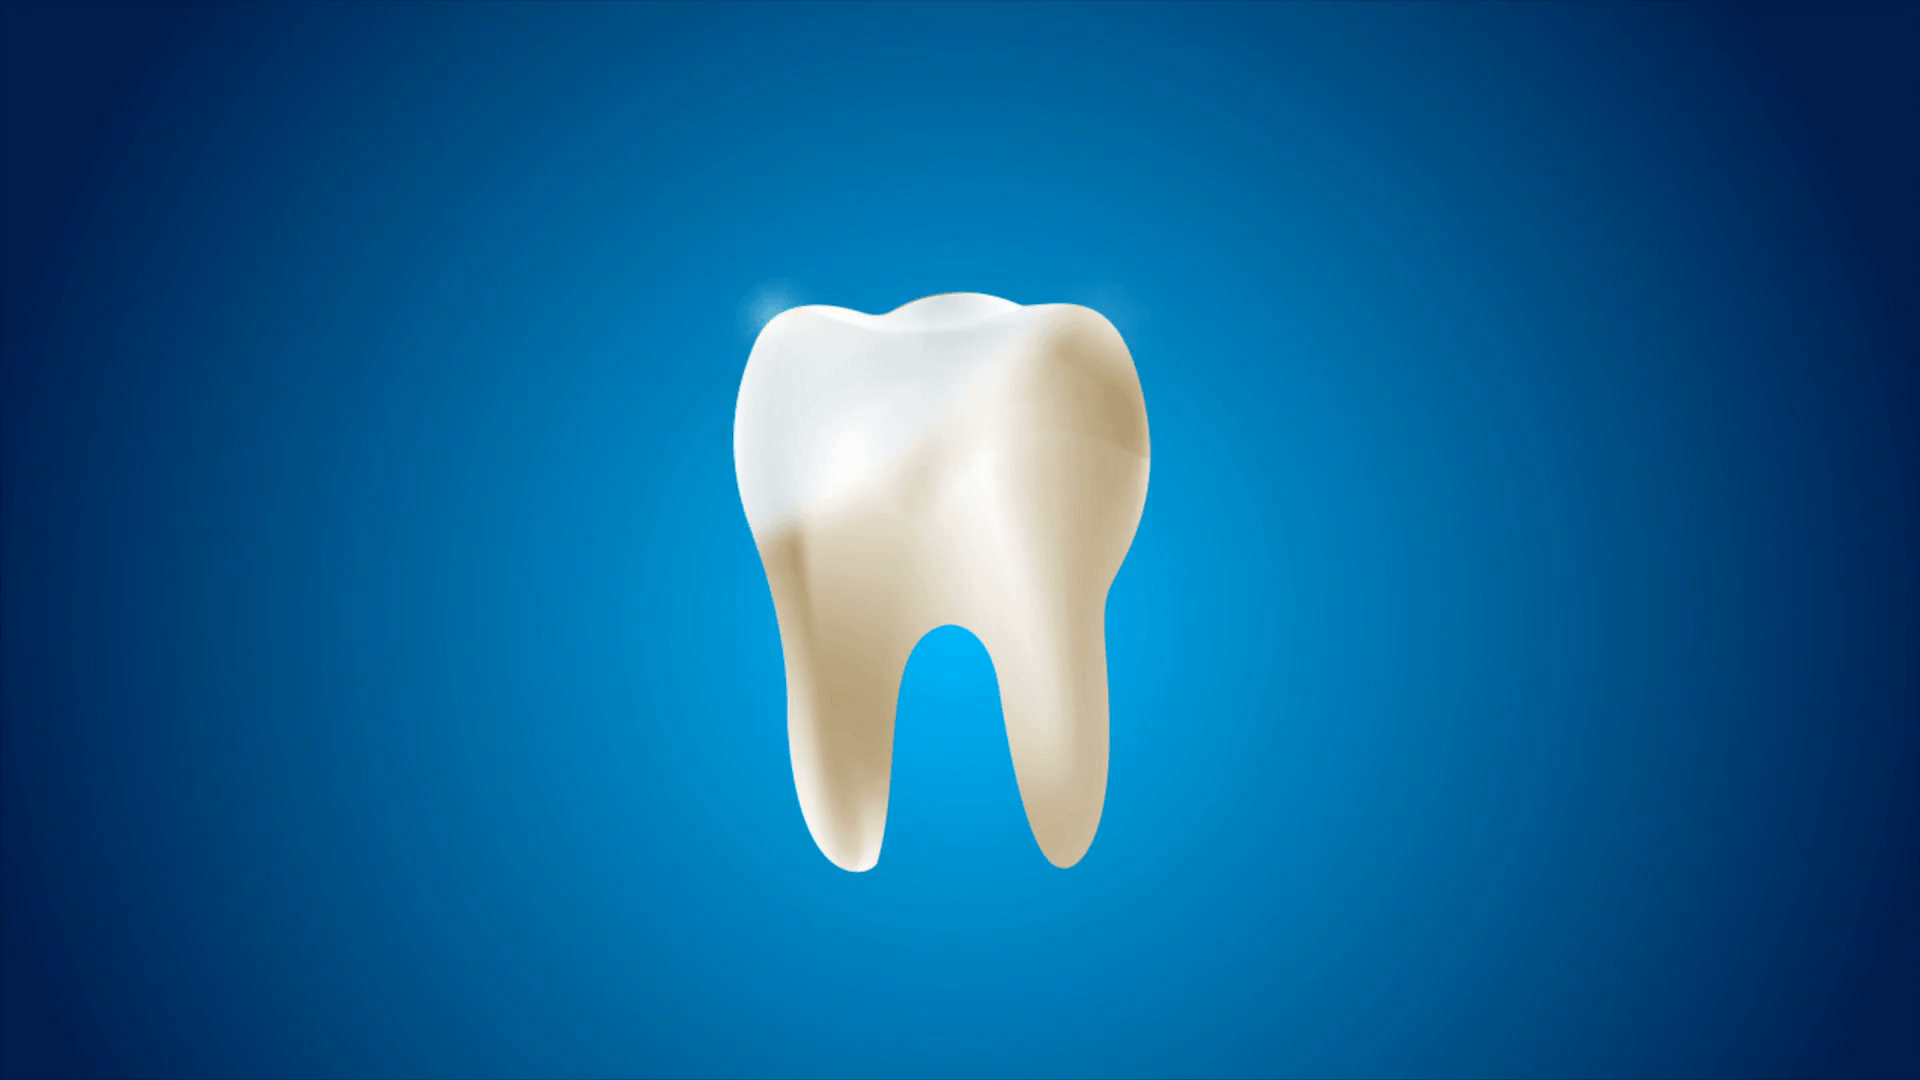 K Animation Clean And Dirty Tooth For Whitening And Protection